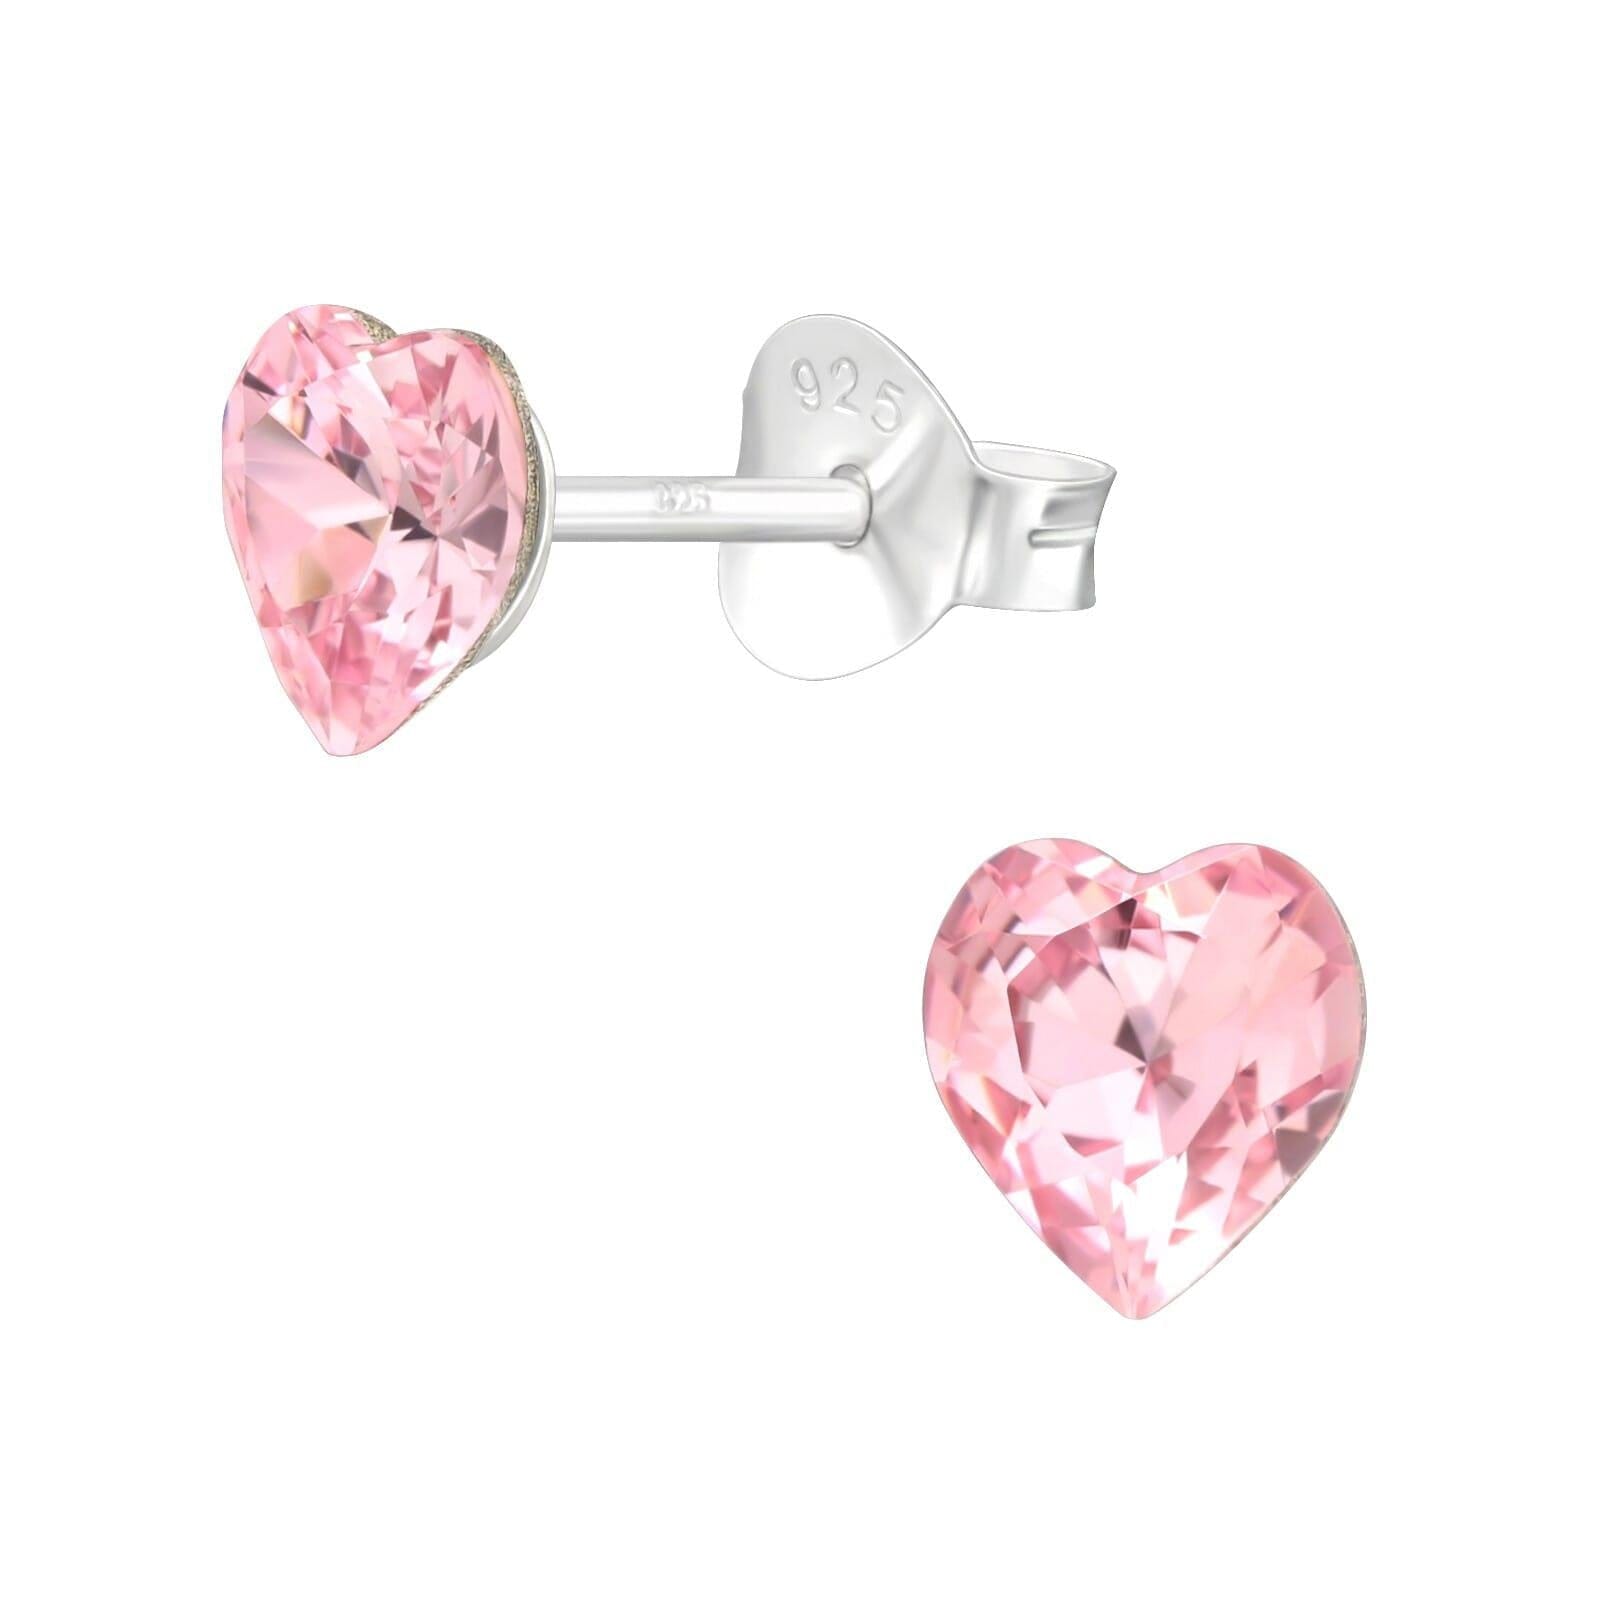 Asfour 925 Sterling Silver Earring with Heart Zicron Stone, Rose